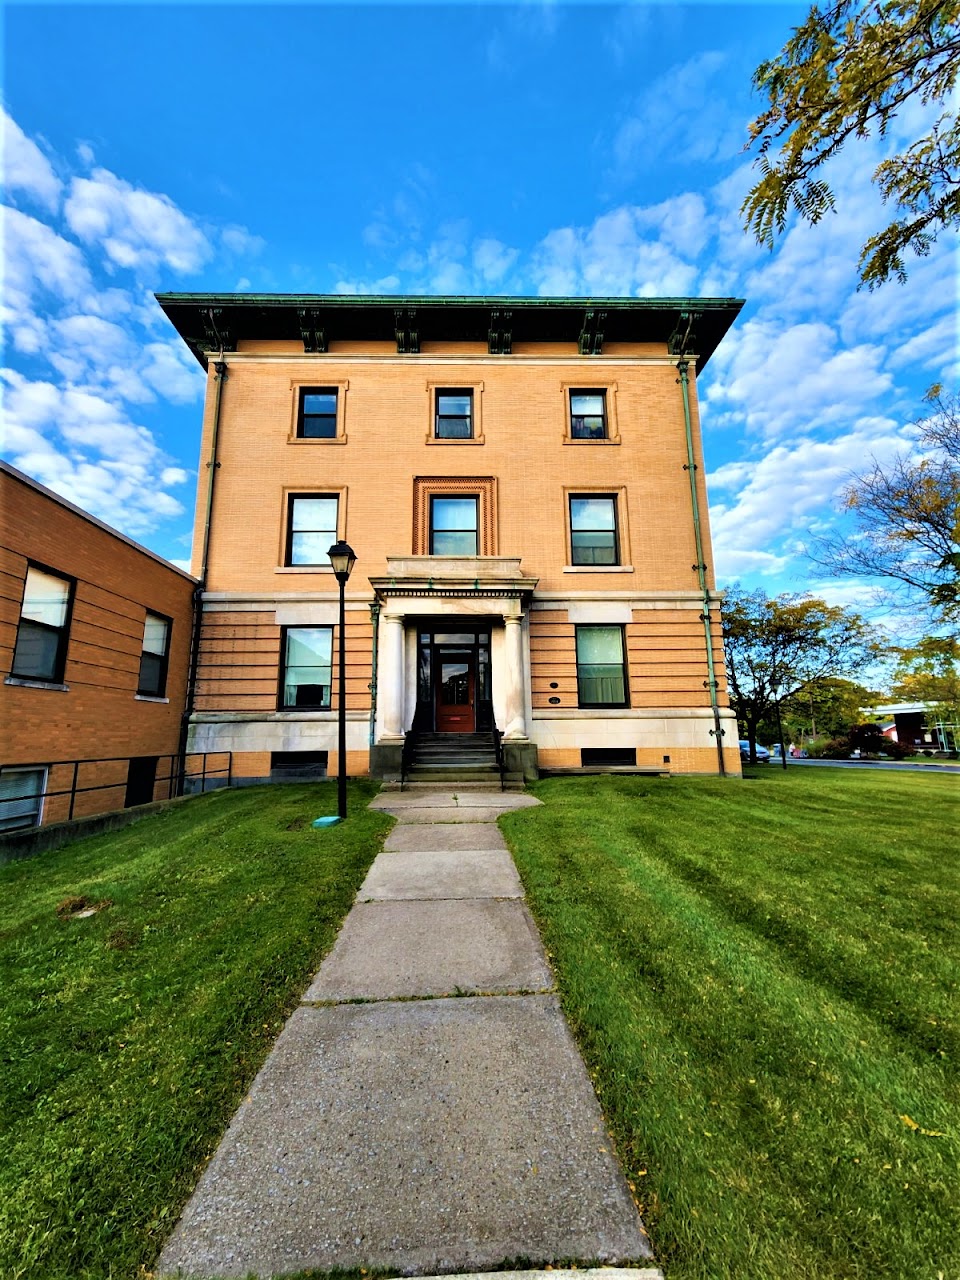 Photo of THOMPSON APTS. Affordable housing located at 120 N MAIN ST CANANDAIGUA, NY 14424